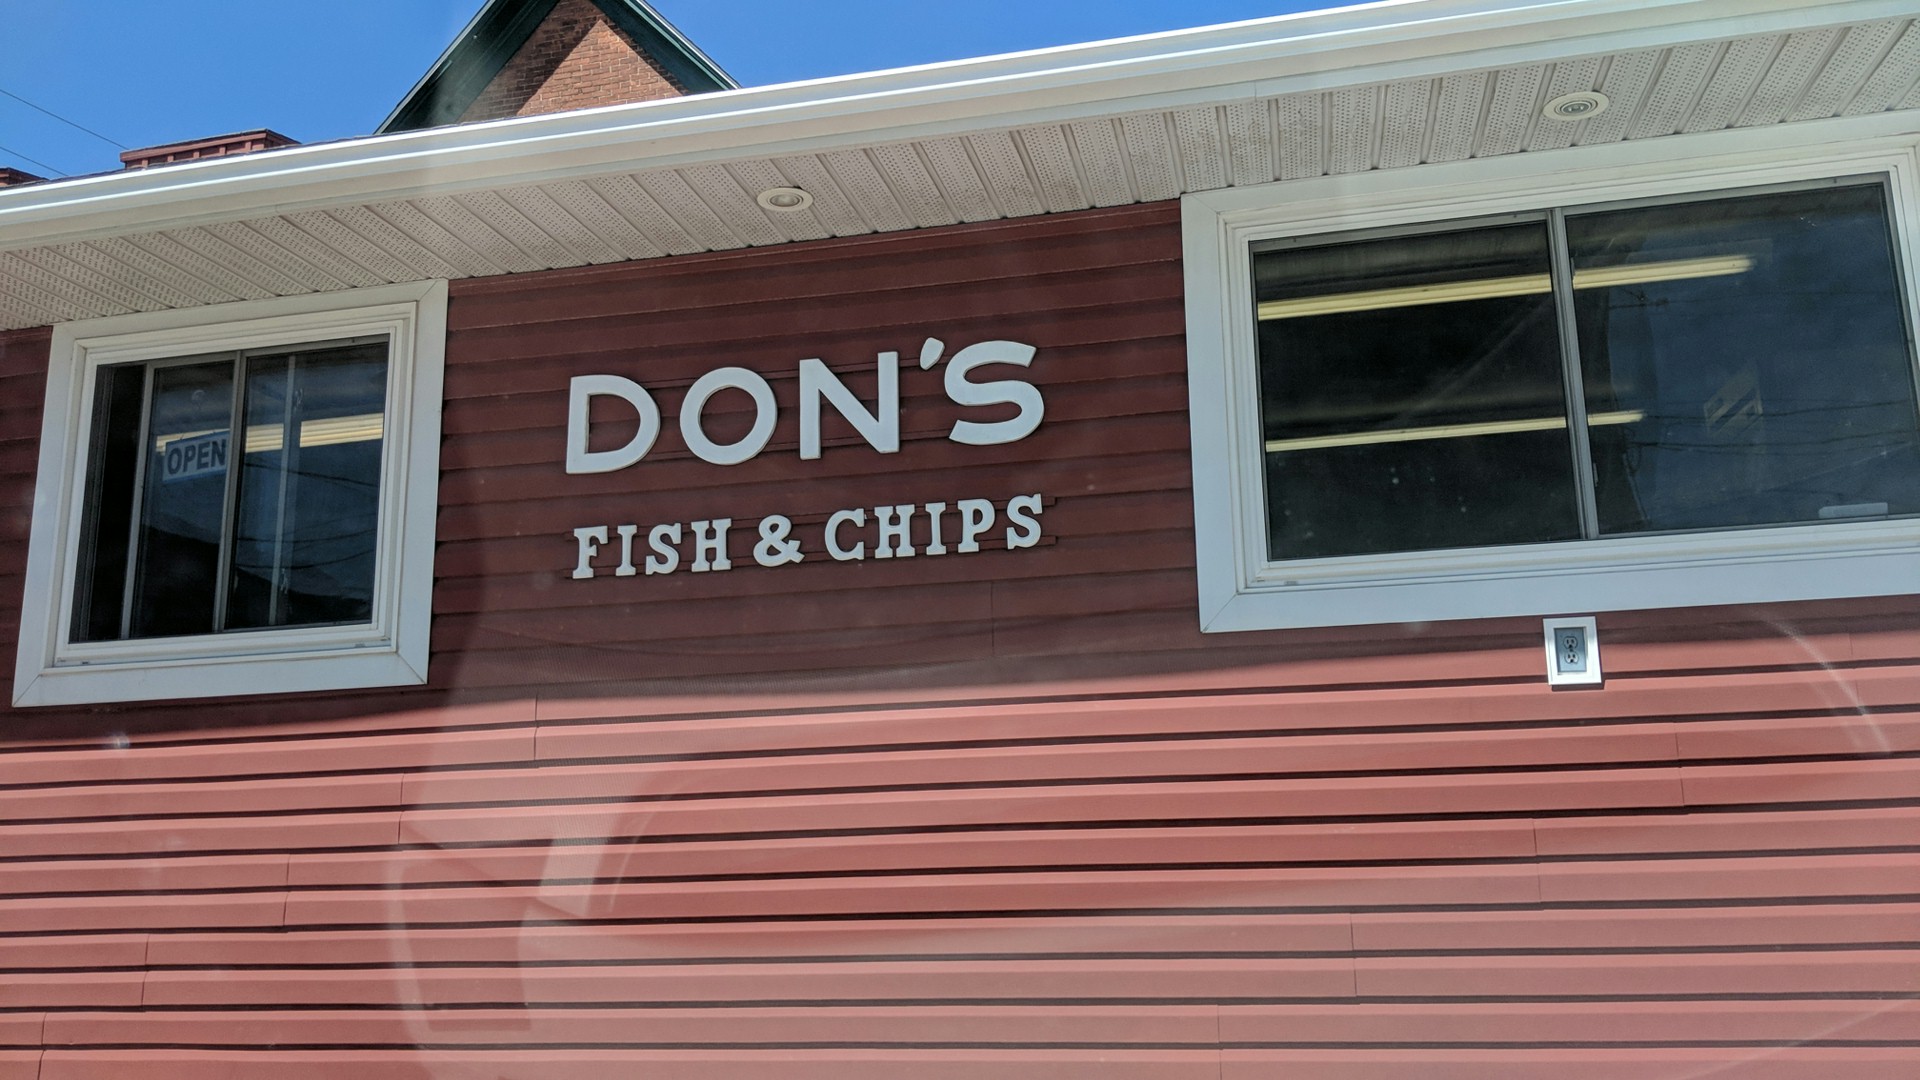 Don's Fish & Chips